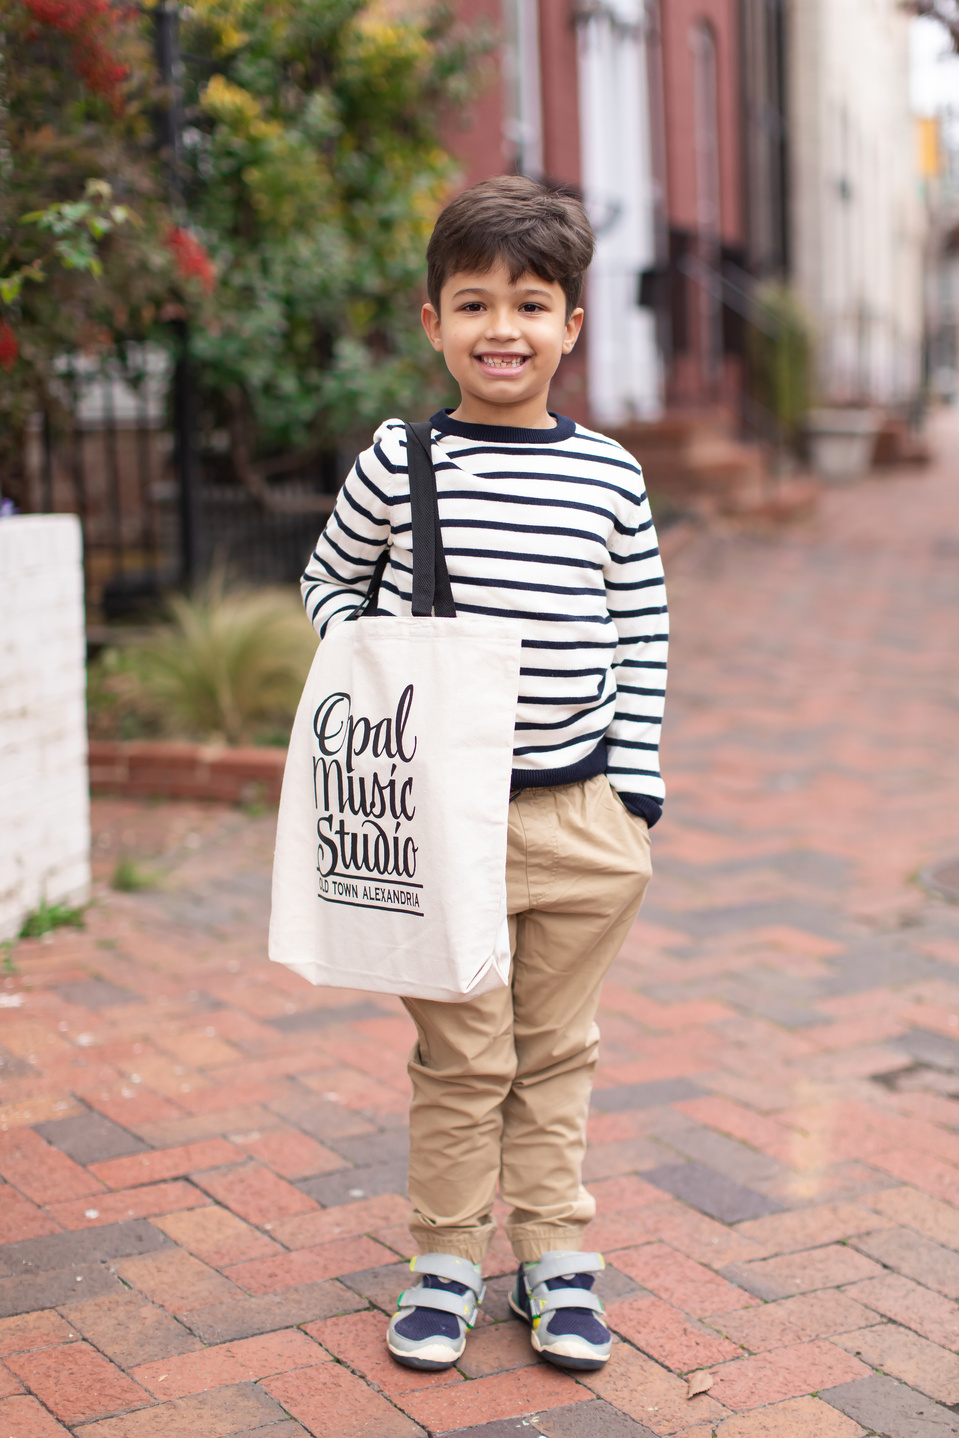 Small boy stood on a red brick street, with a Opal Music Studio tote bag on his shoulder.